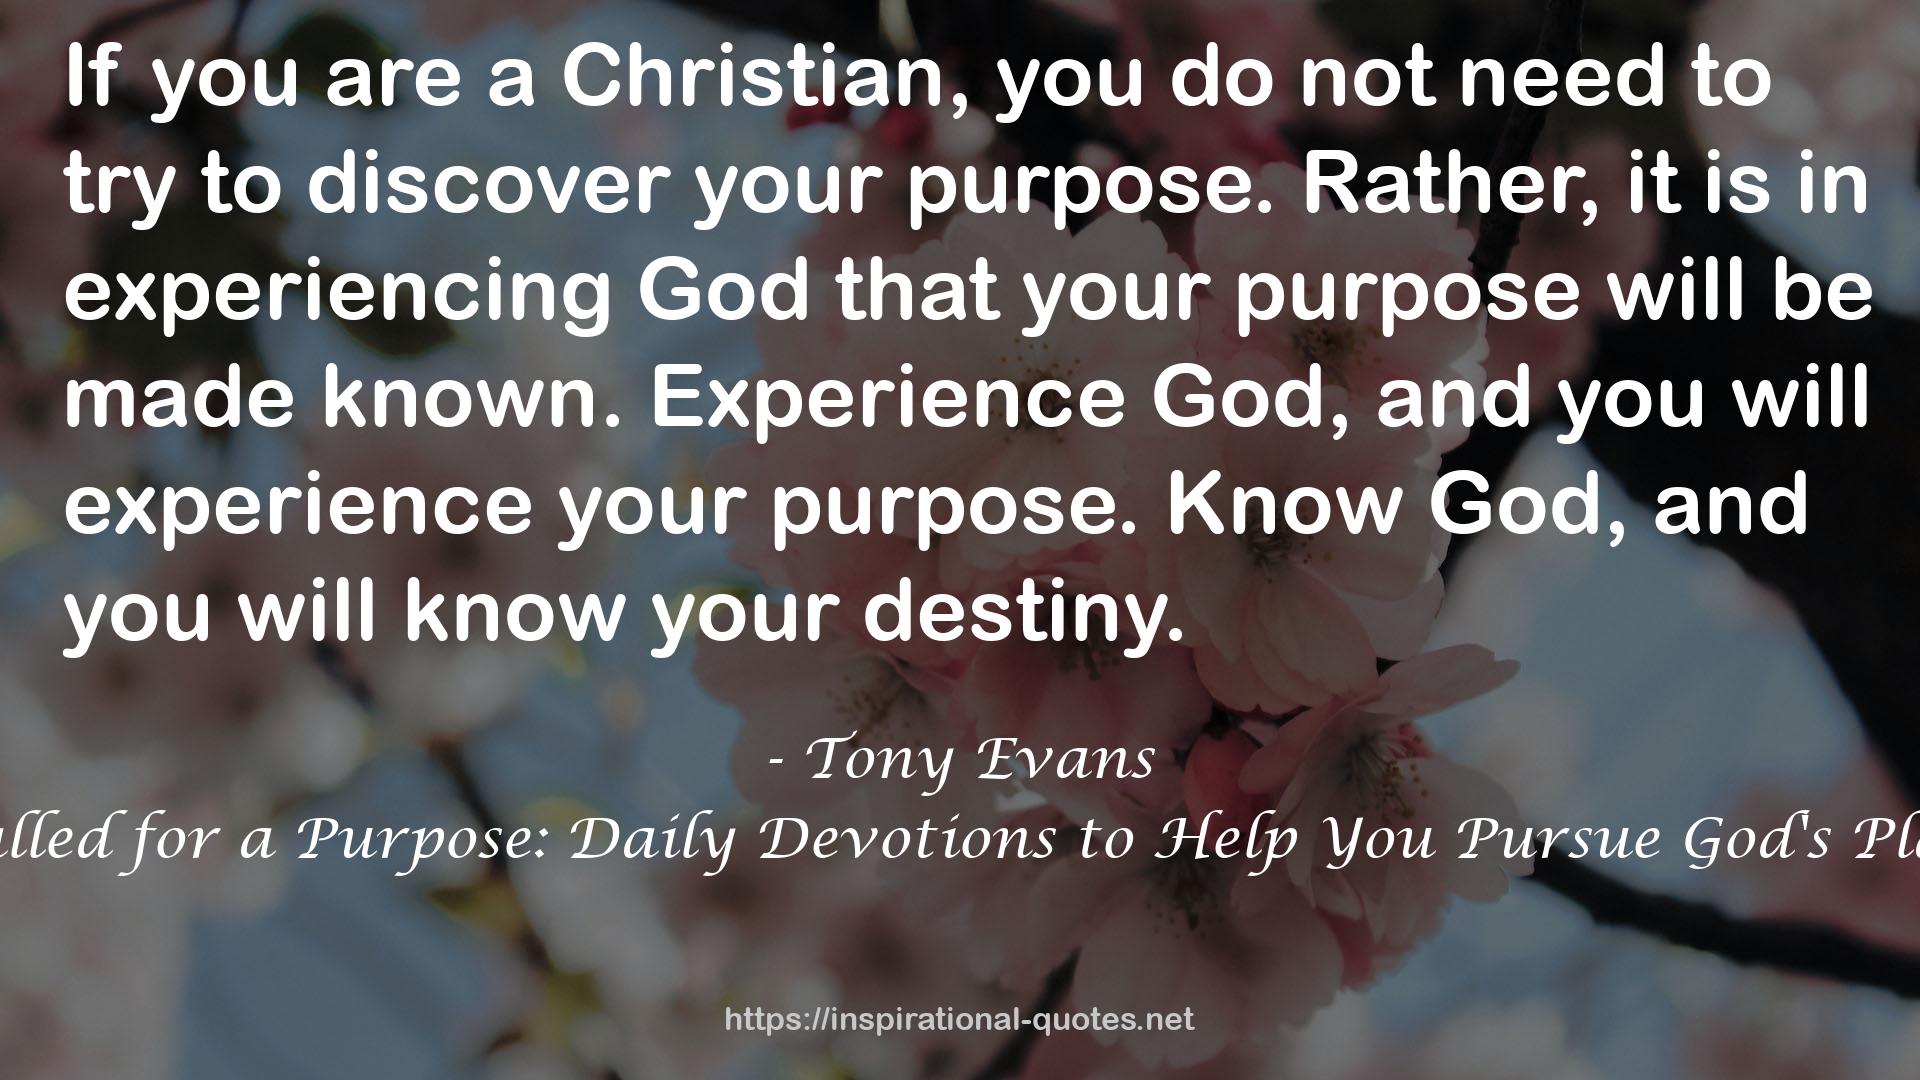 Called for a Purpose: Daily Devotions to Help You Pursue God's Plan QUOTES